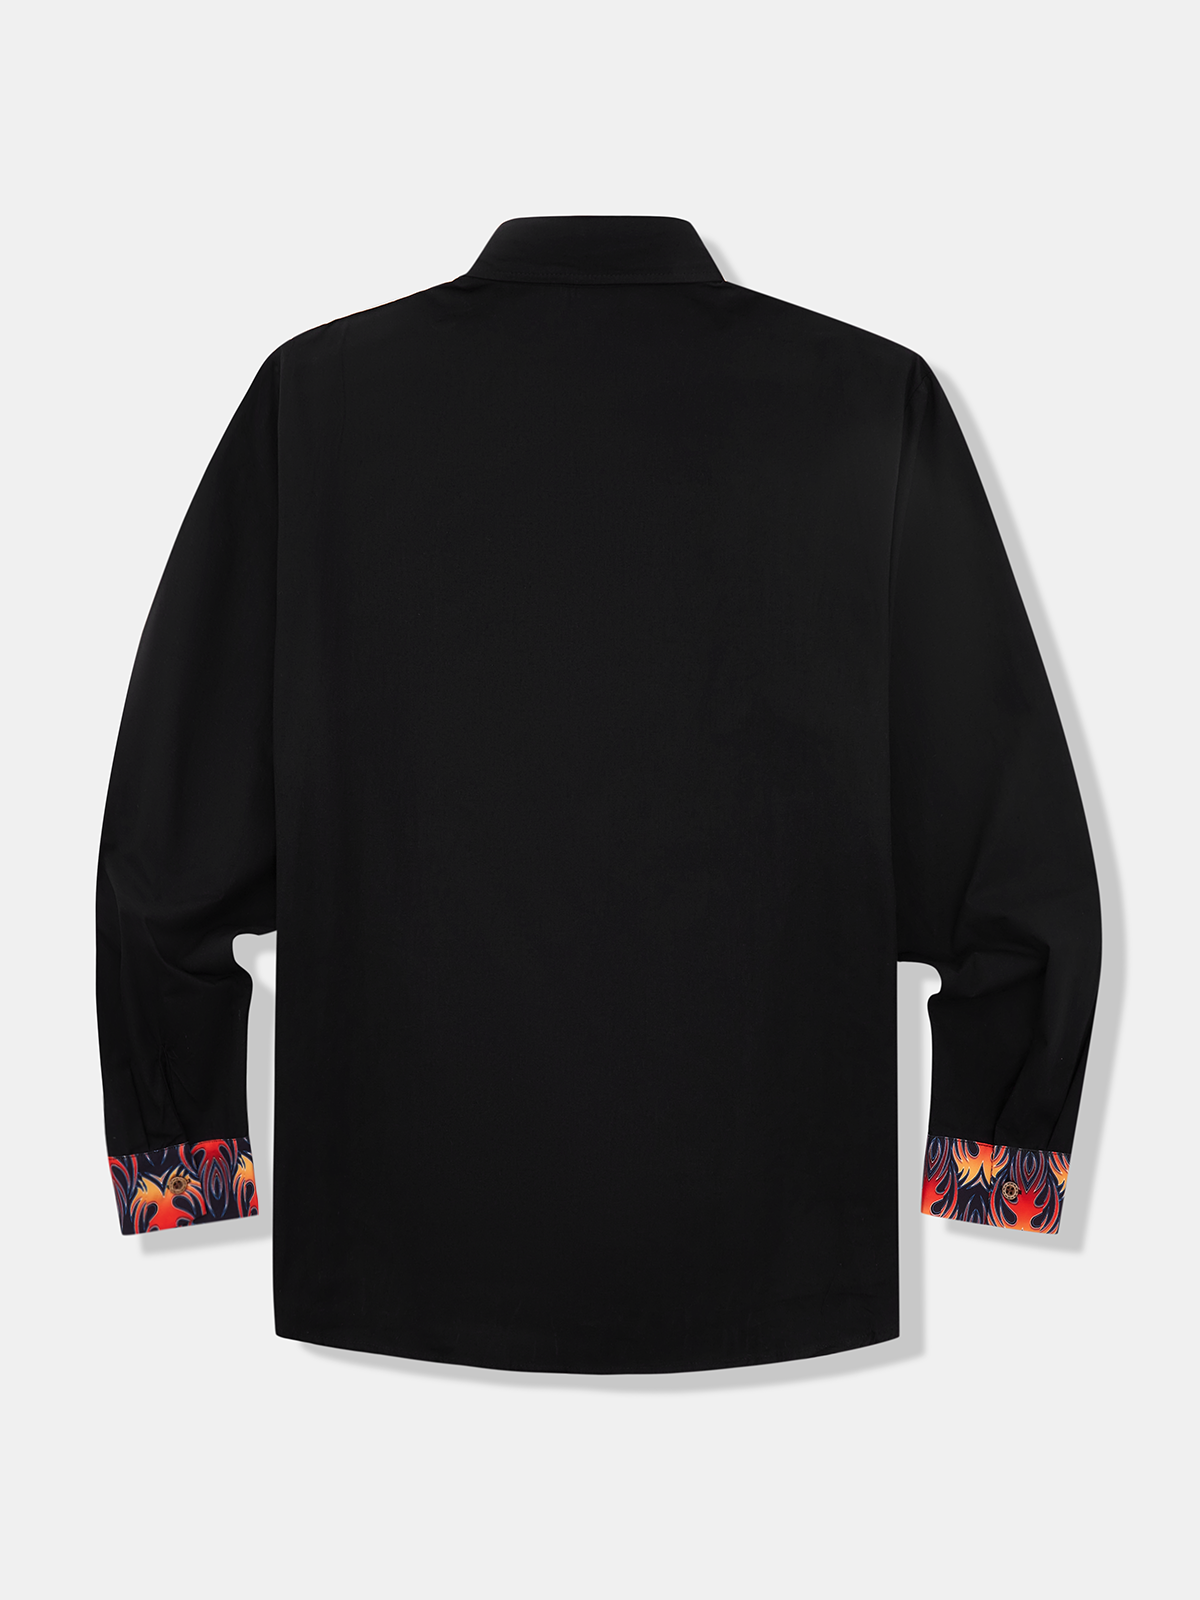 Hardaddy Cotton Patchwork Flame Print Chest Pocket Long Sleeved Shirt